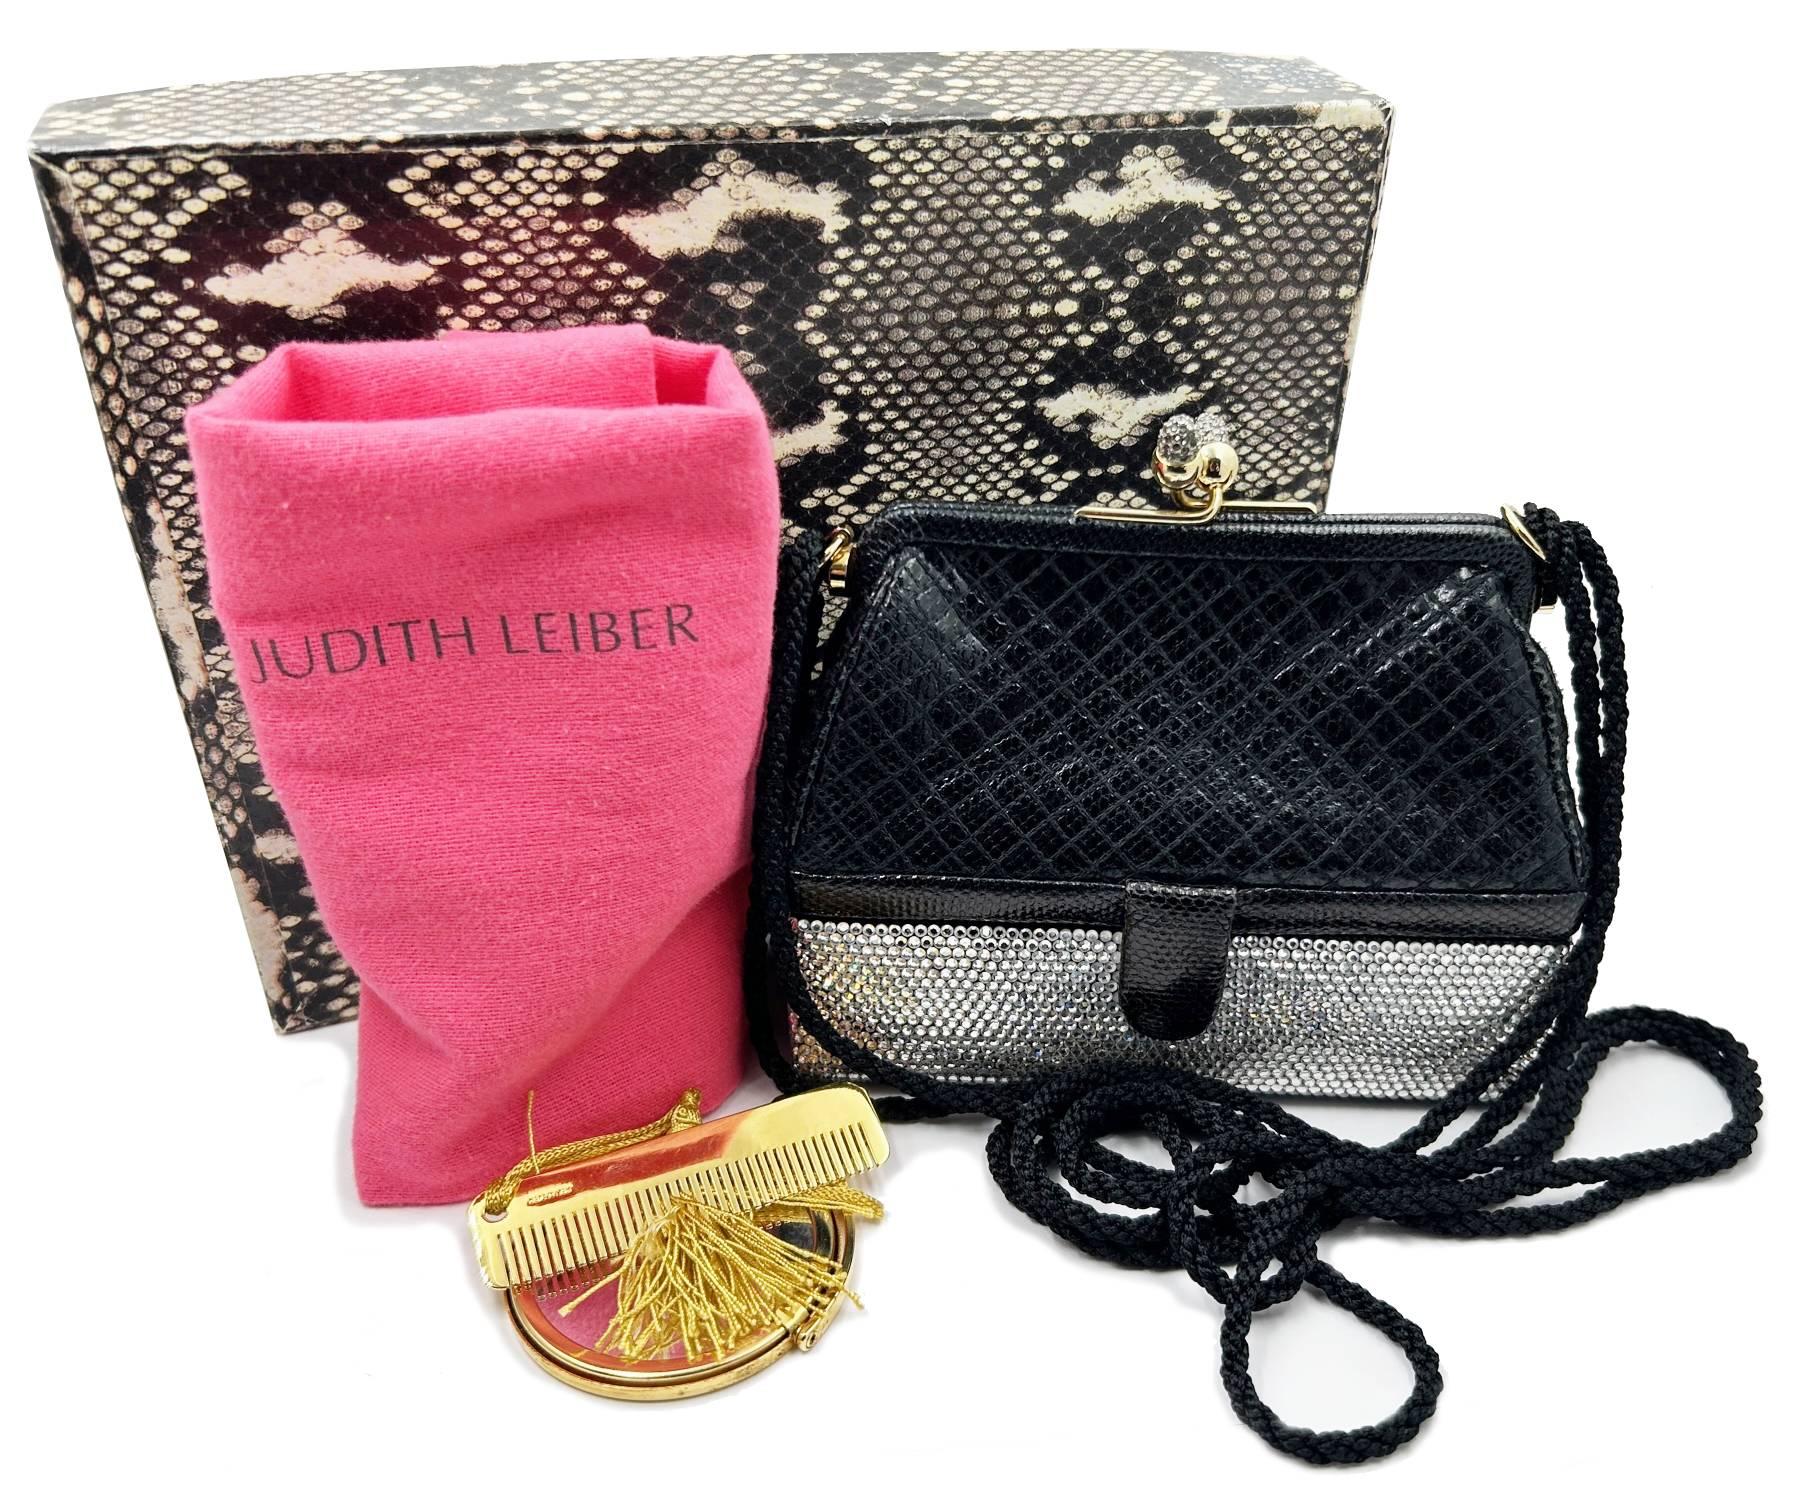 Judith Leiber Vintage Black 007James Bond Snakeskin Silver Crystal Crossbody Bag

*Marked Judith Leiber
*Made in Italy
*Comes with original box, dustbag, comb and mirror, in a complete set.

-It is approximately 6.1